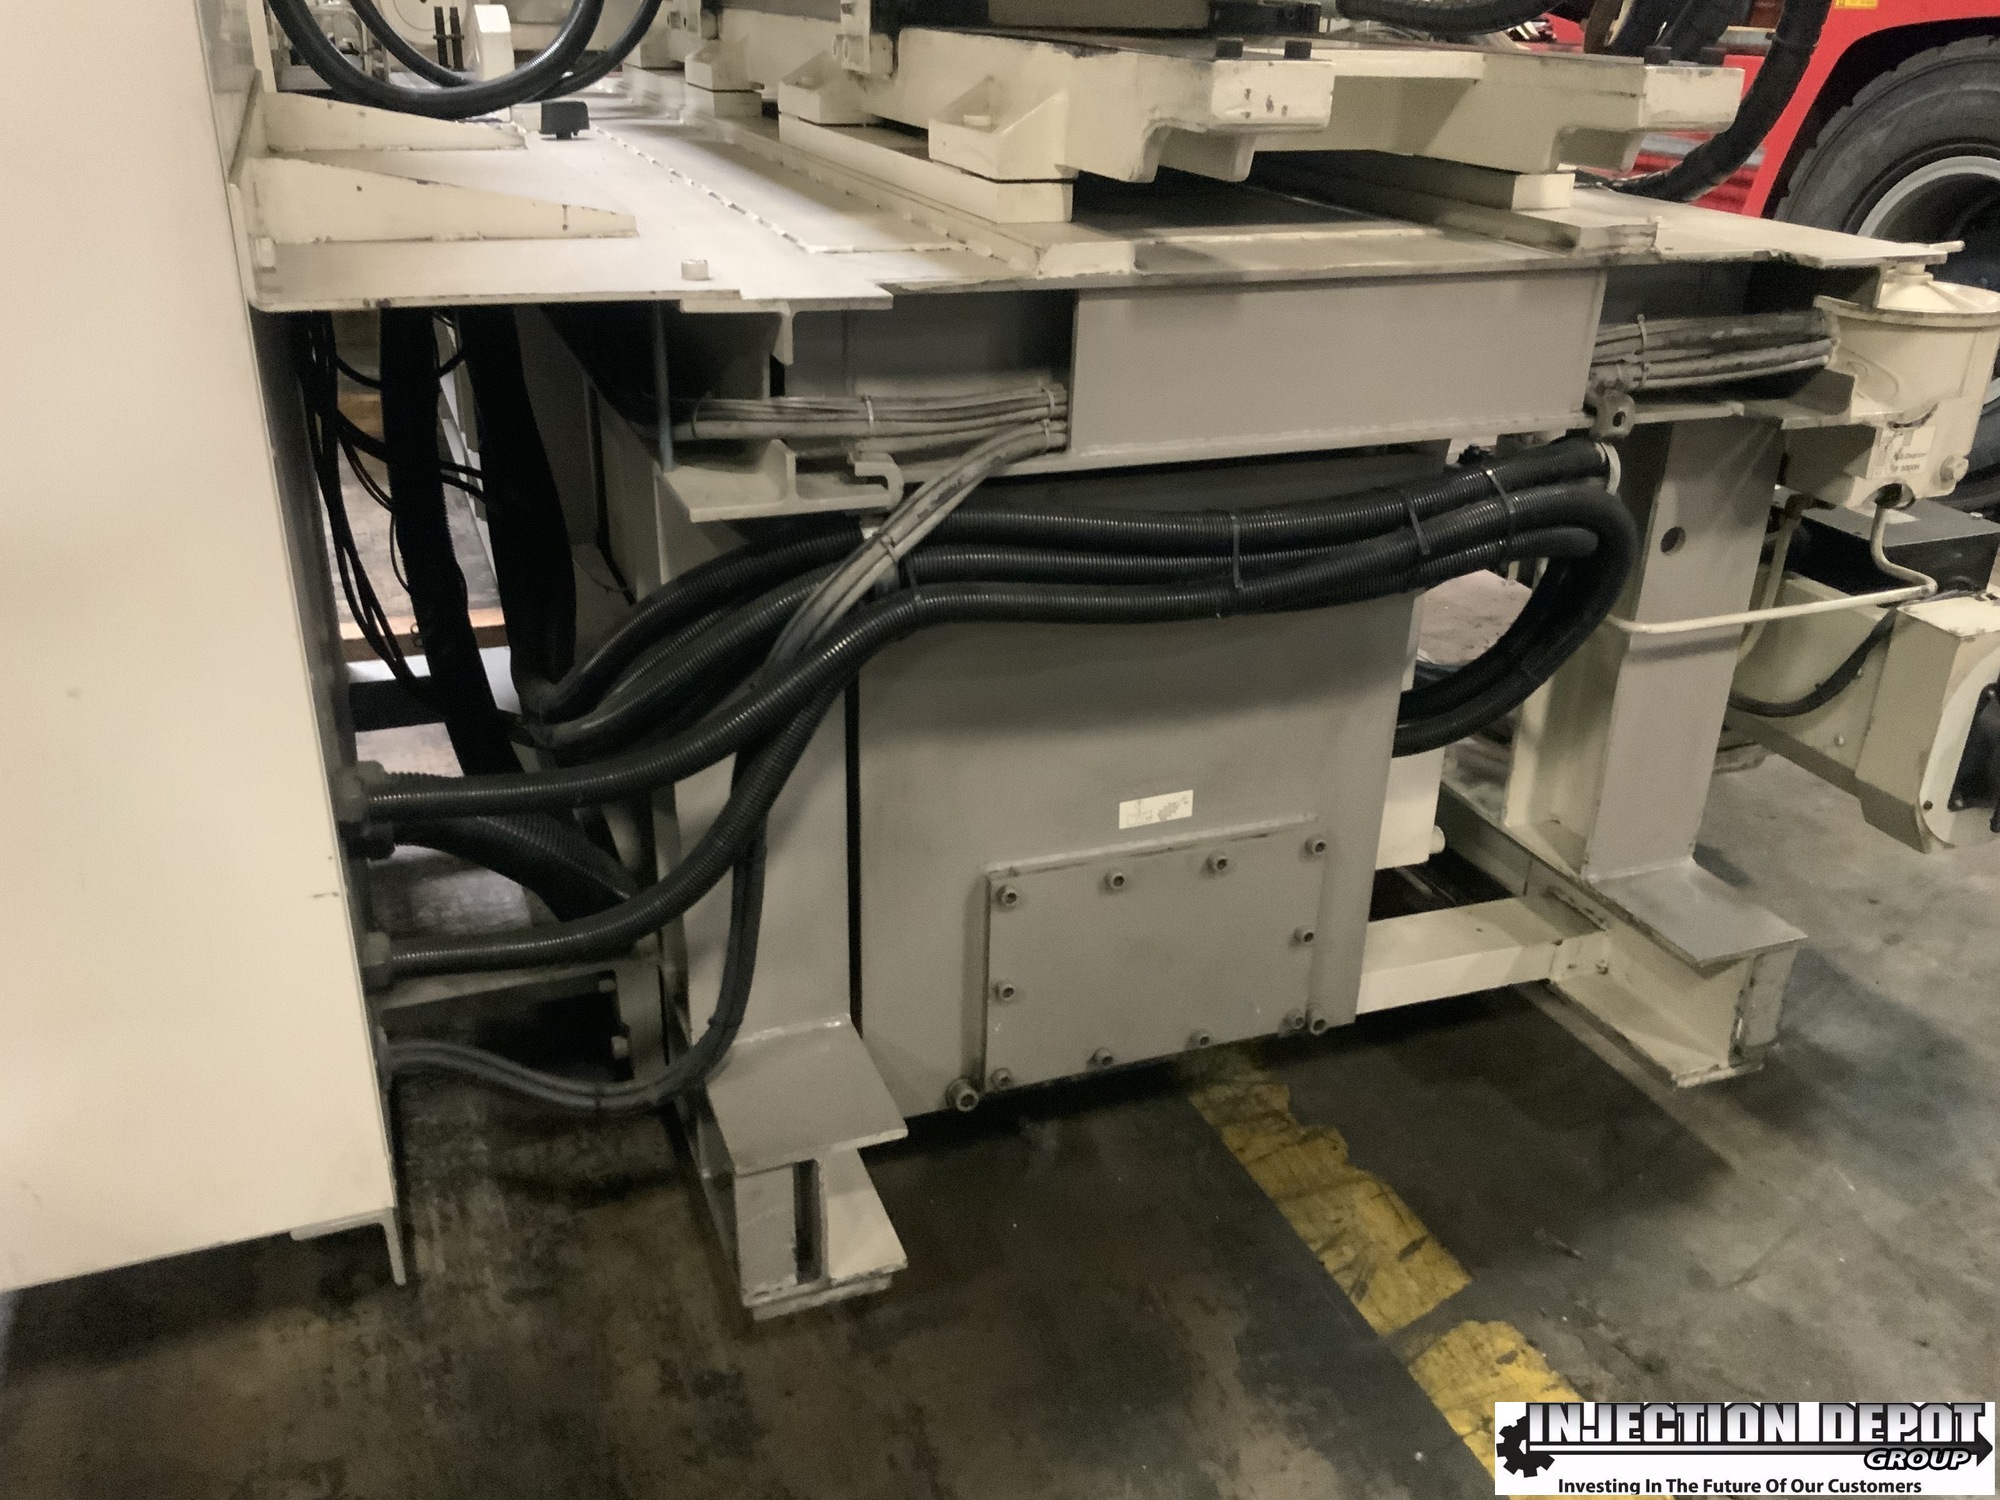 2015 TOSHIBA ISGS500WV50-27AT Horizontal Injection Moulding Machines | INJECTION DEPOT GROUP